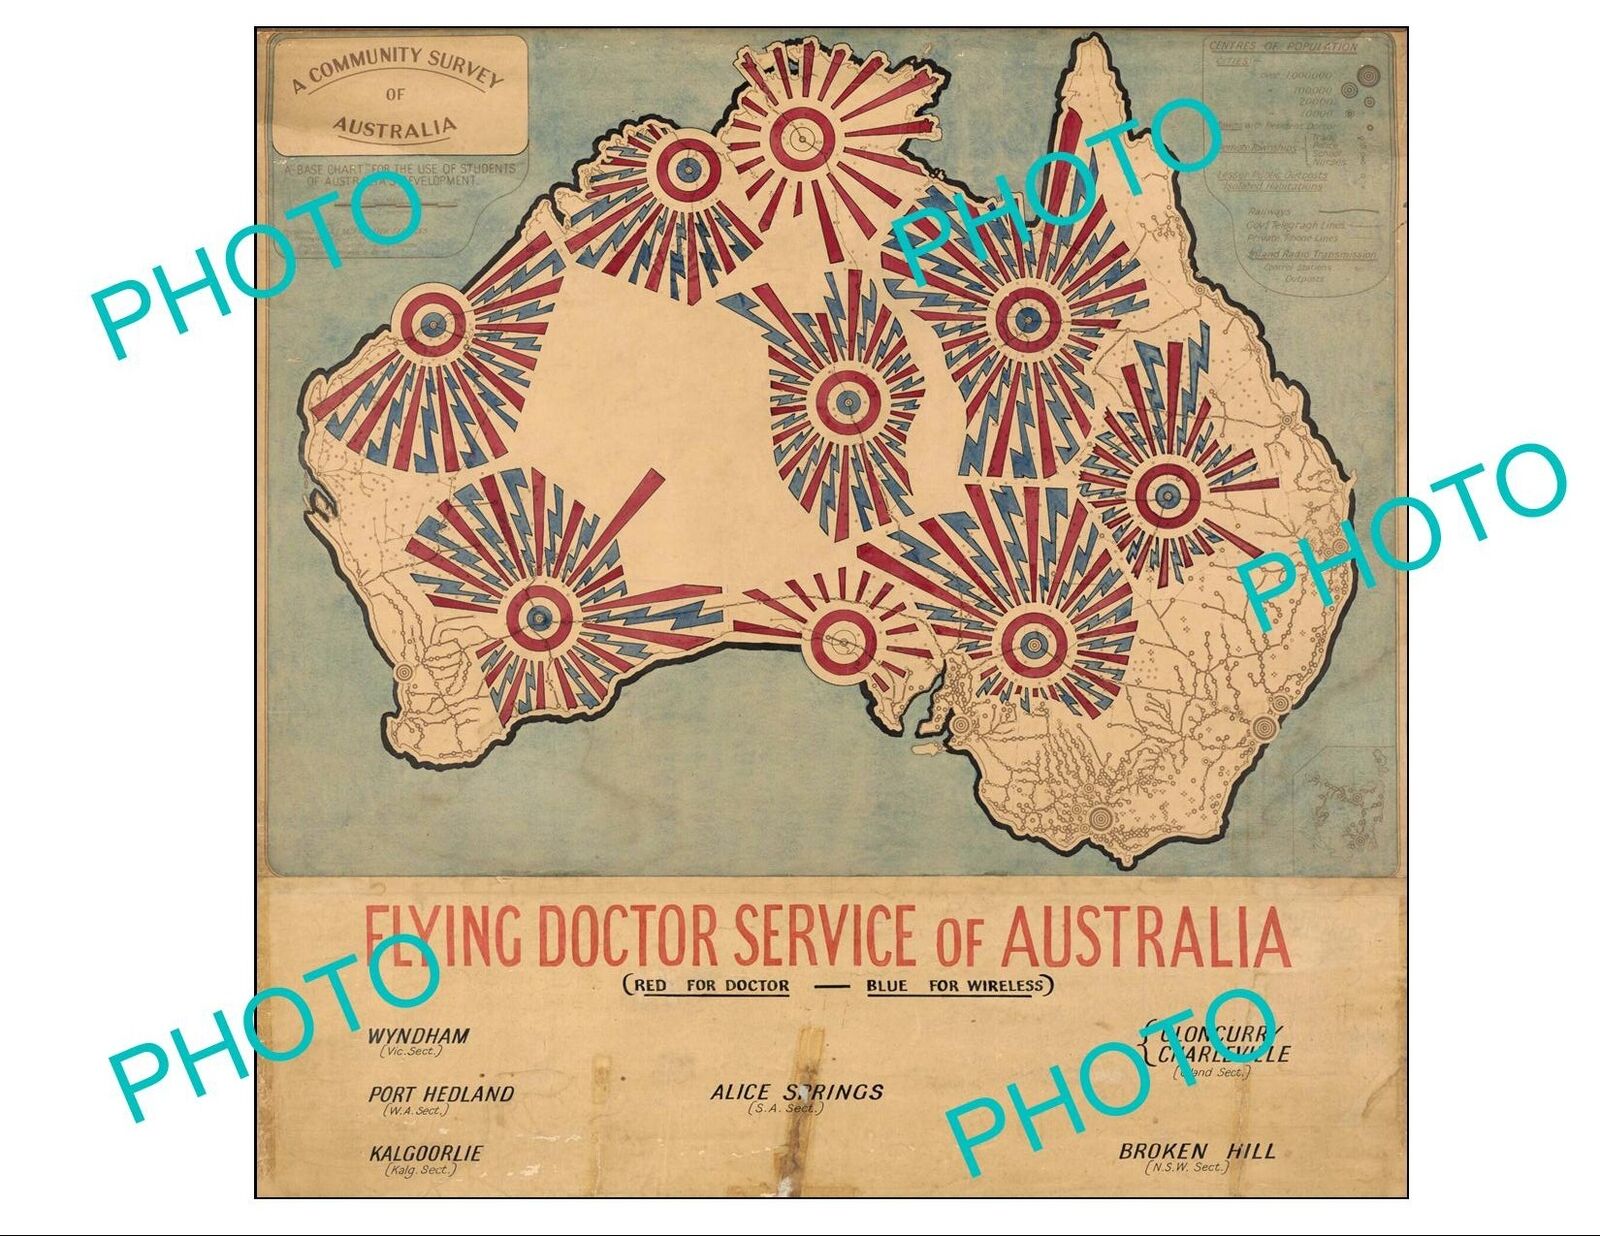 LARGE A3 HISTORIC PRINT OF ROYAL AUSTRALIAN FLYING DOCTORS SERVICE MAP c1940